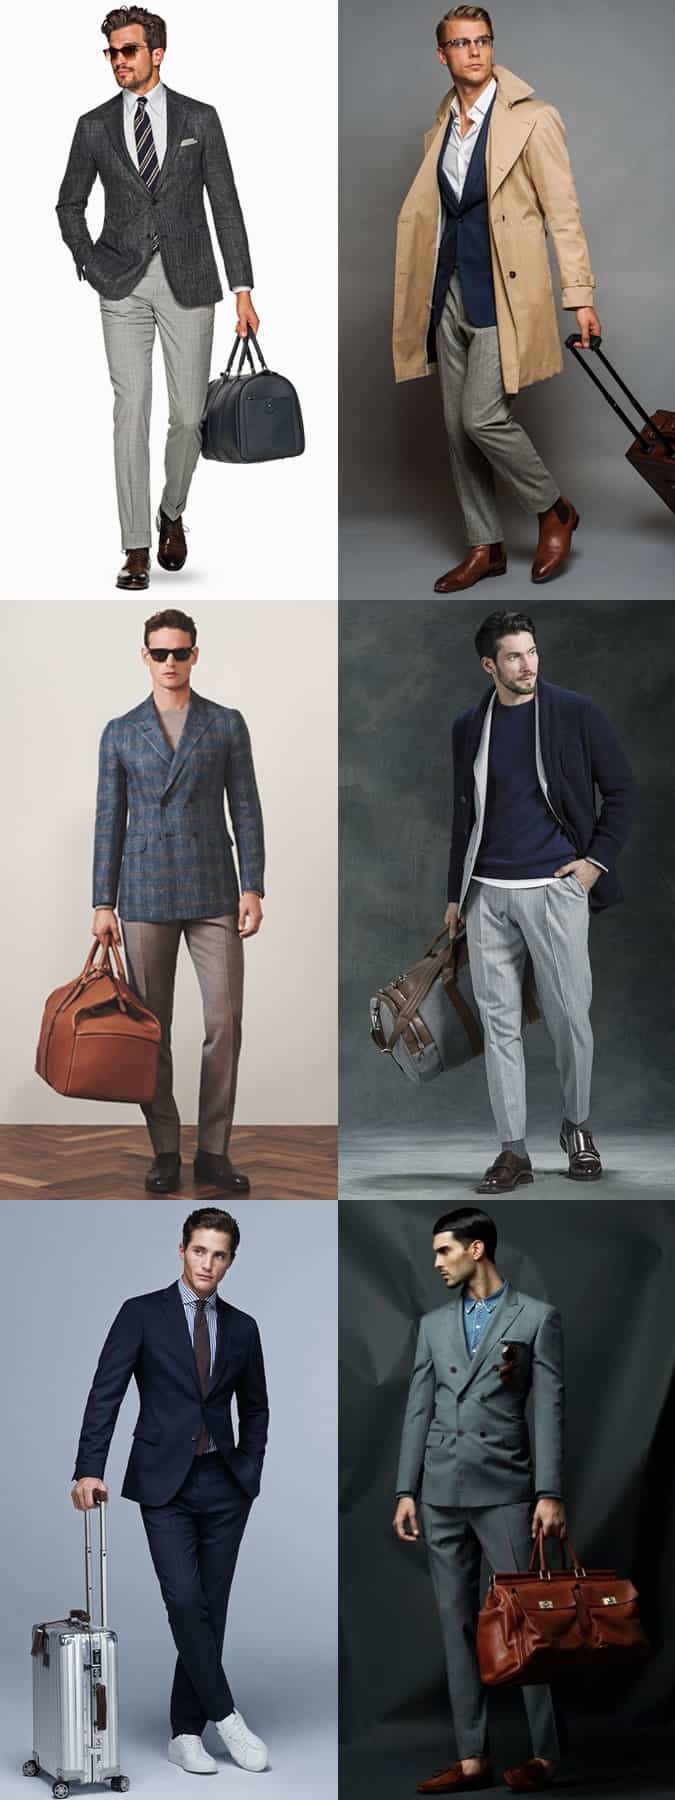 The Men's Business Travel Style Guide